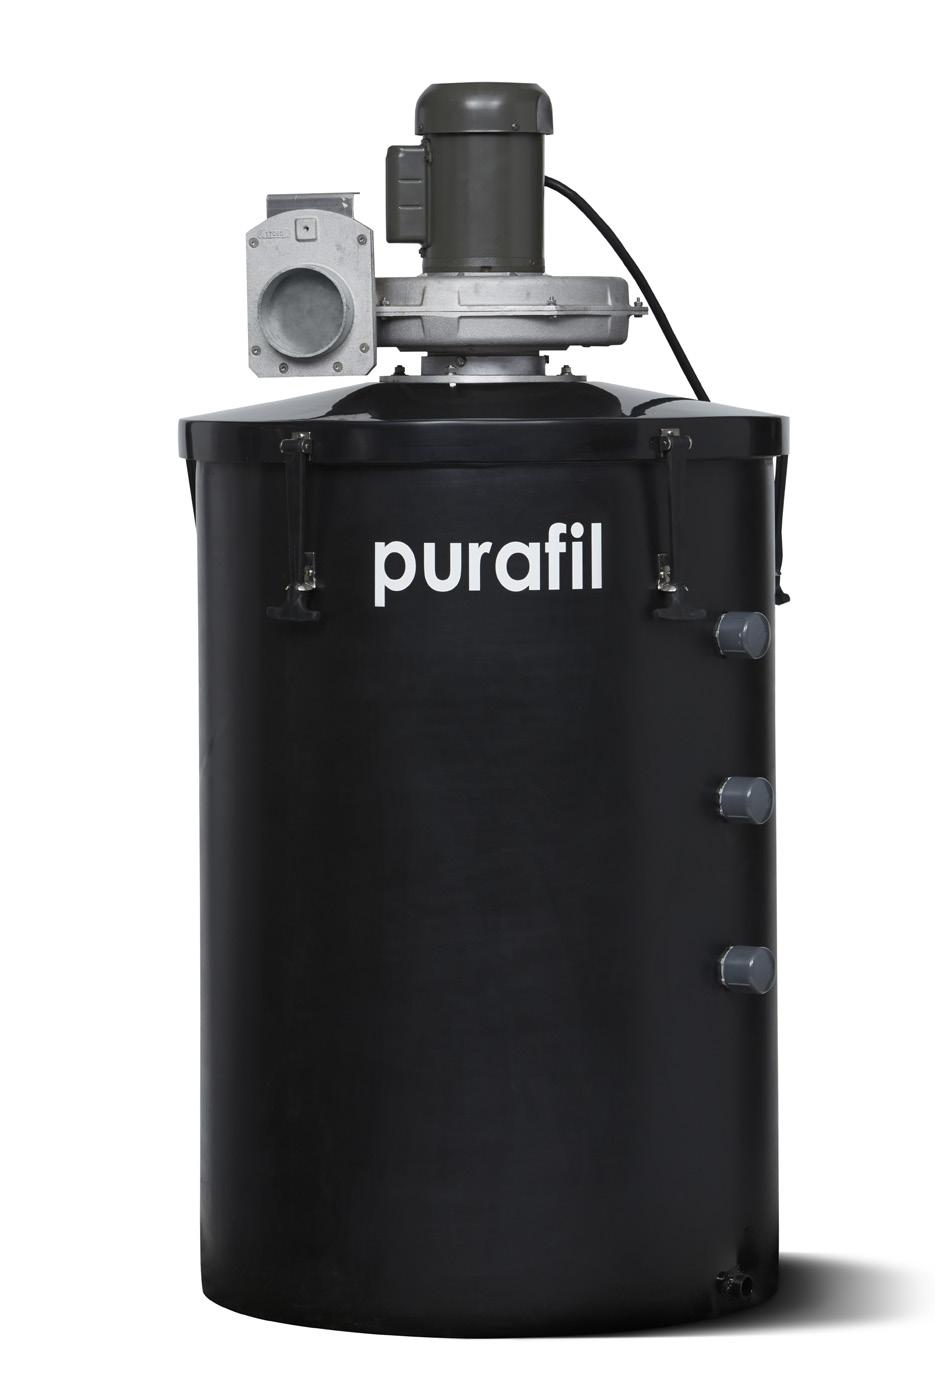 DRUM SCRUBBER 1000 The Purafil Drum Scrubber 1000 (DS-1000) is ideal for removal of odorous gases found at pump stations, lift stations, wet wells, force mains, and wastewater treatment plants.